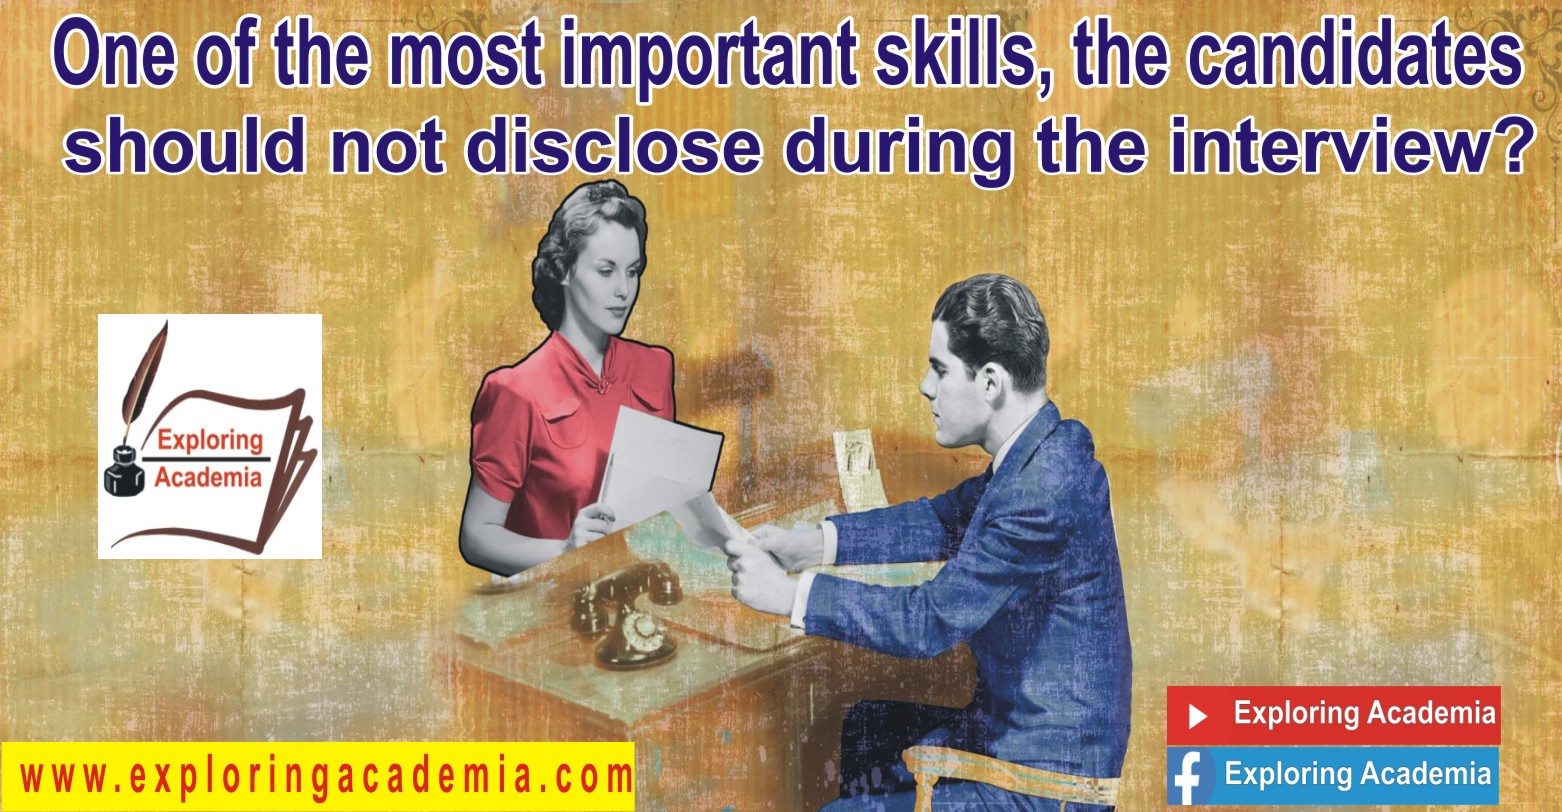 One of the most important skills, the candidates should not disclose during the interview?